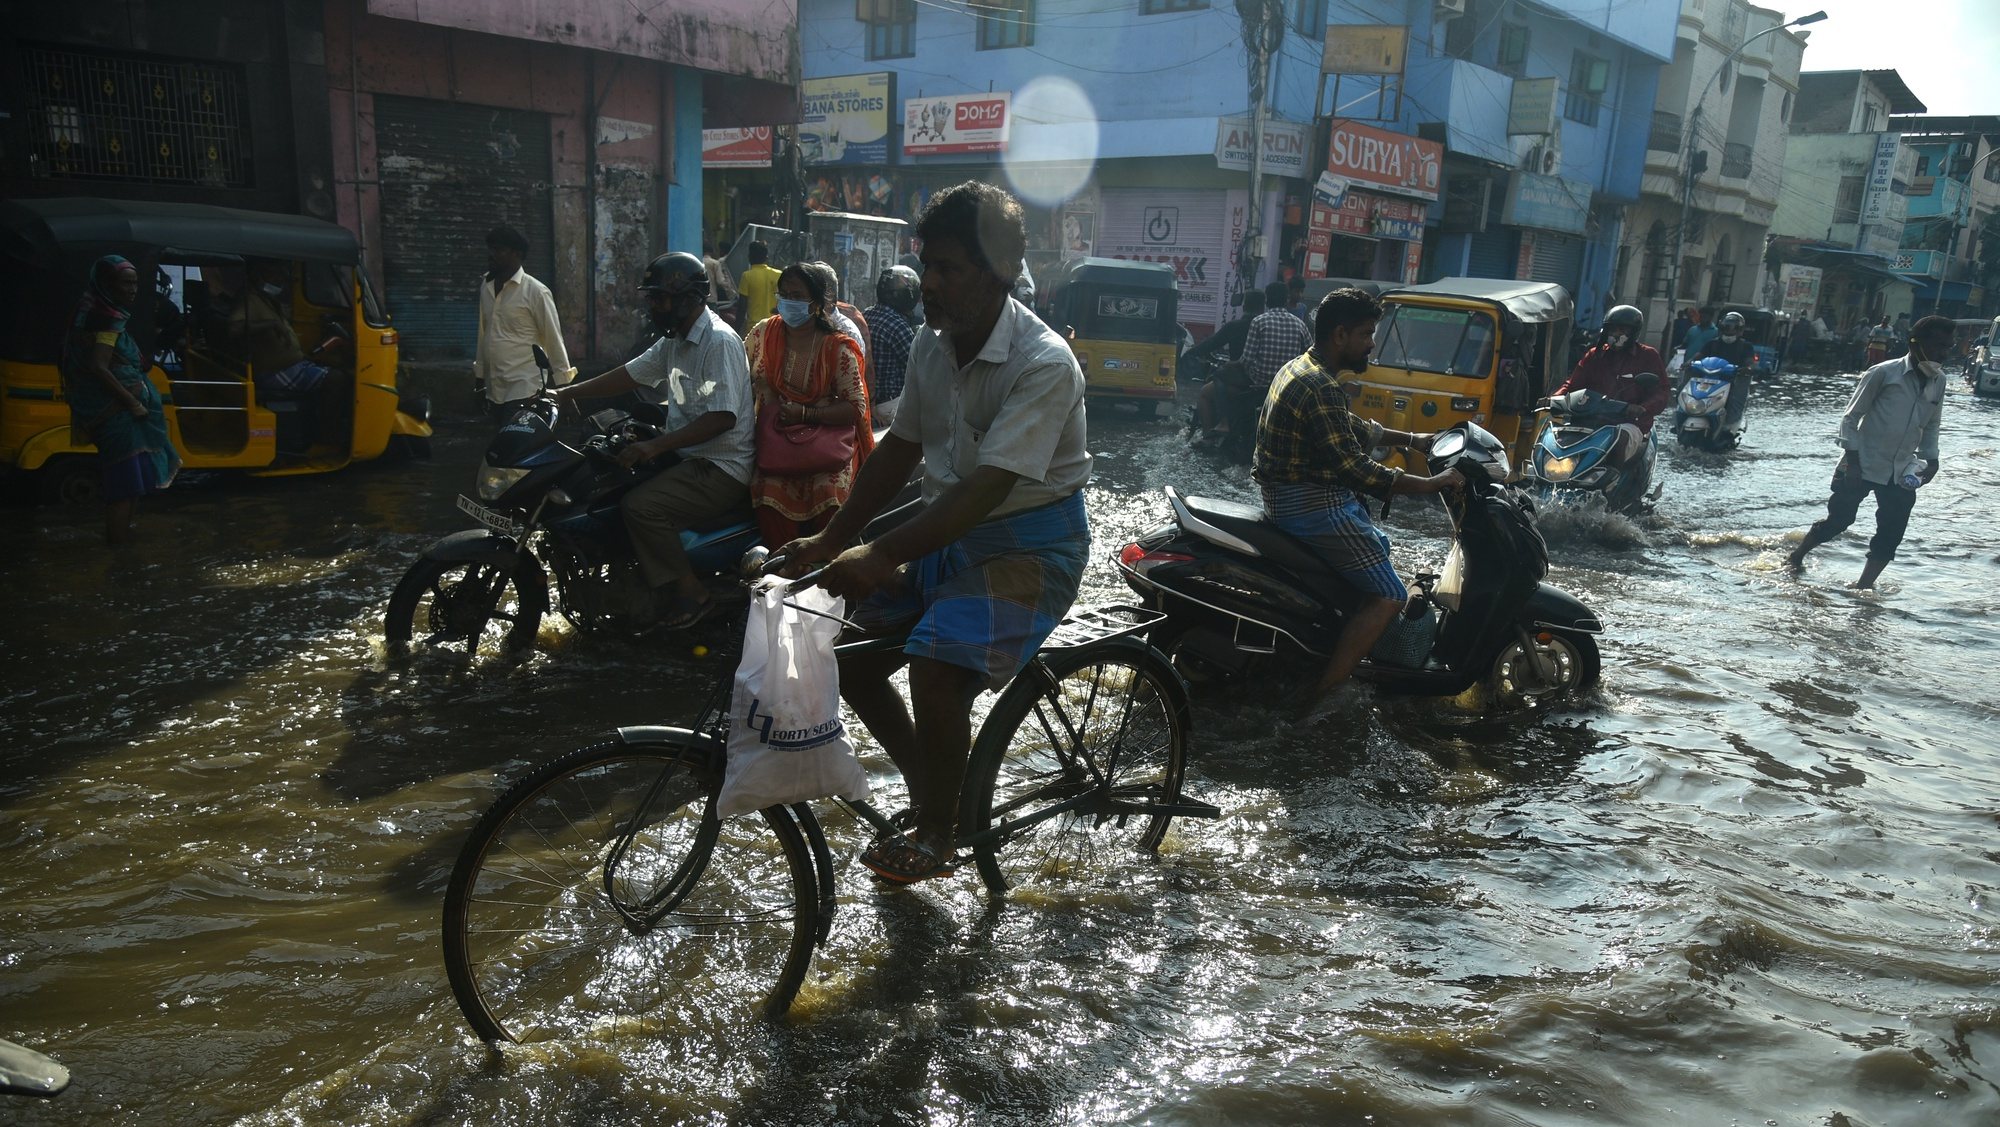 epa09581684 People commute through a waterlogged road following incessant heavy rains, in Chennai, India, 14 November 2021. The India Meteorological Department (IMD) has withdrawn a red alert for extremely heavy rainfall in Chennai and rainfall across the state of Tamil Nadu is likely to reduce from 15 November. While floodwater receded in the majority of the inundated areas, water stagnation persisted in a few areas of Chennai following heavy rains. Tamil Nadu reports 17 deaths due to heavy rains and waterlogging in several places.  EPA/IDREES MOHAMMED